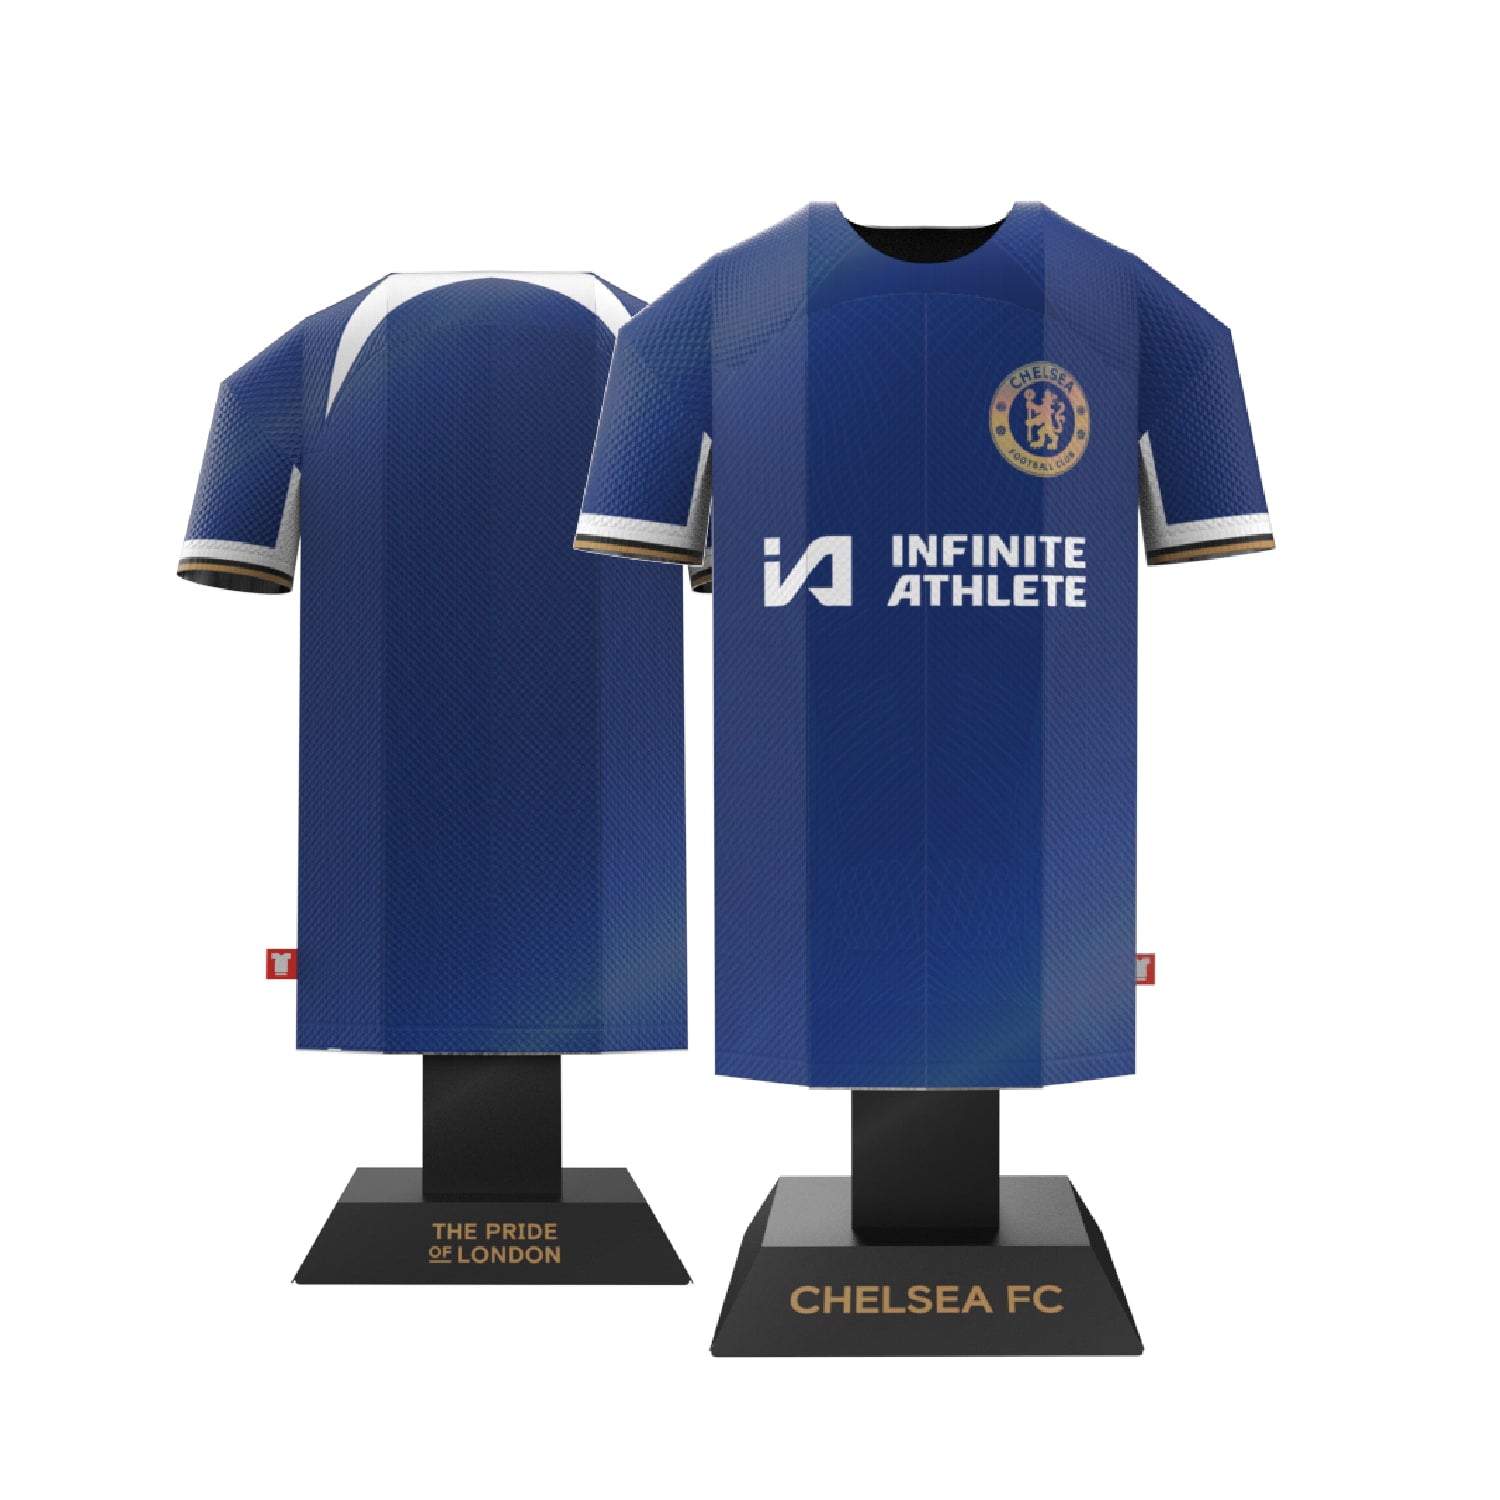 Chelsea home kit front and back